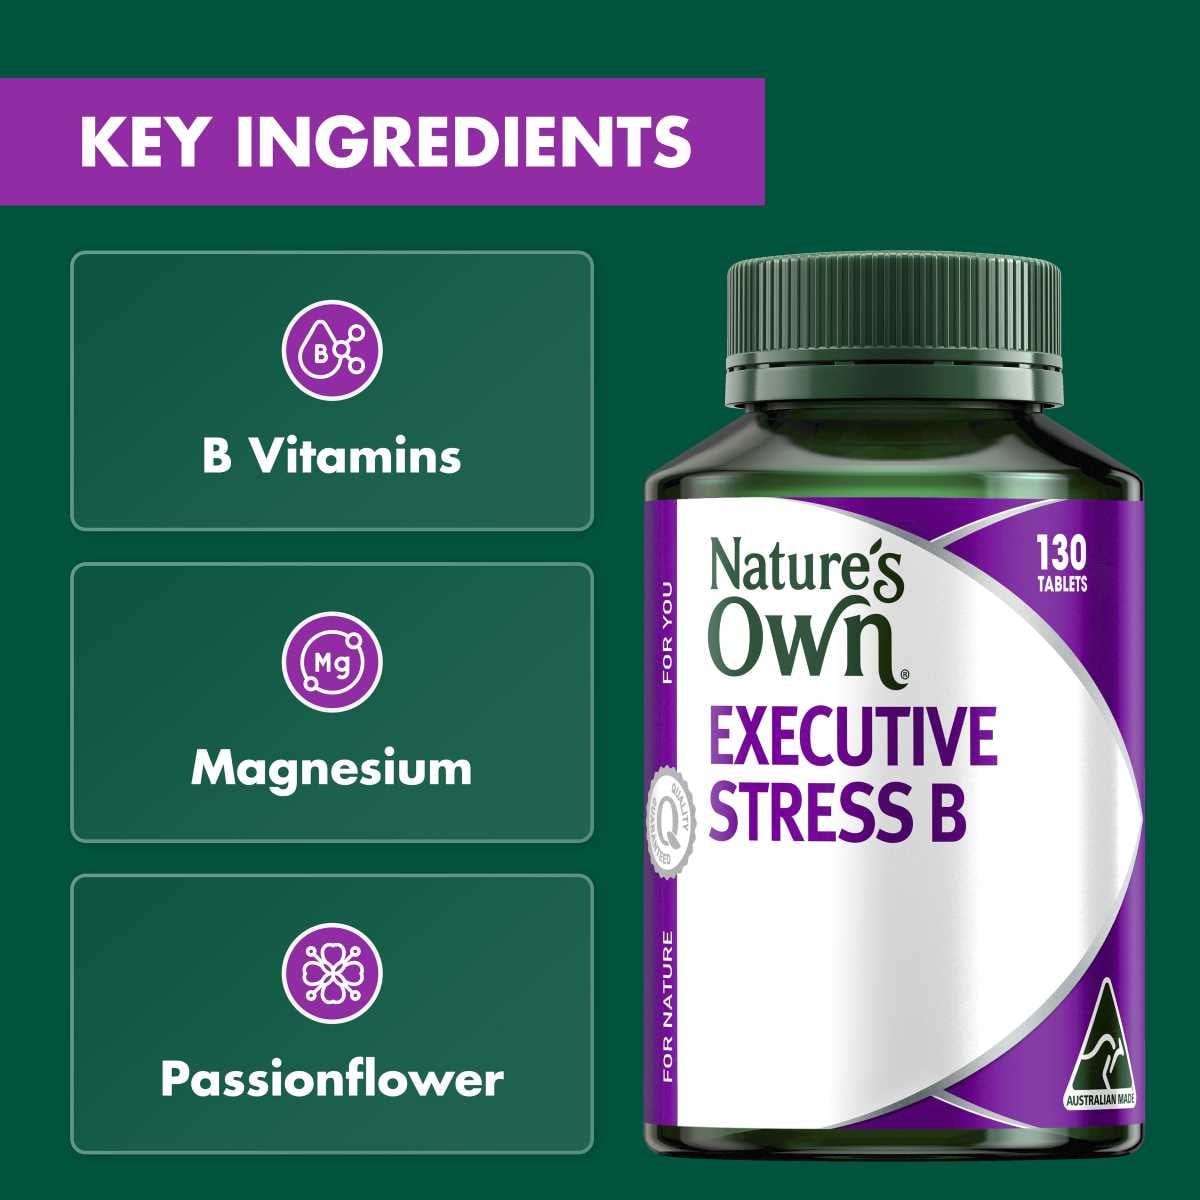 Nature's Own Executive Stress B 130 Tablets